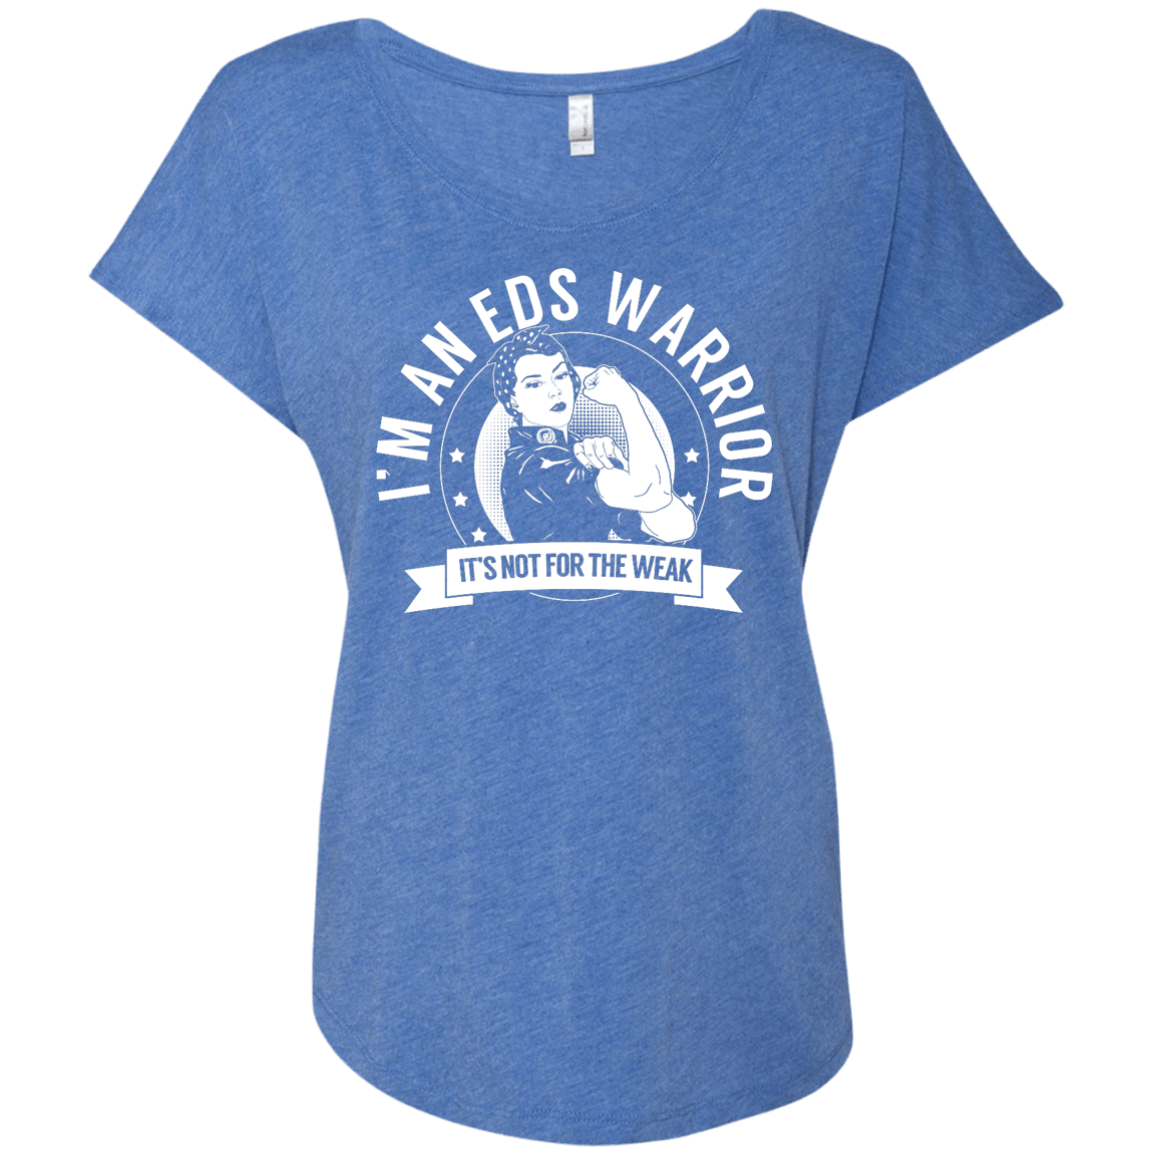 Ehlers Danlos Syndrome - EDS Warrior Not for the Weak Dolman Sleeve - The Unchargeables